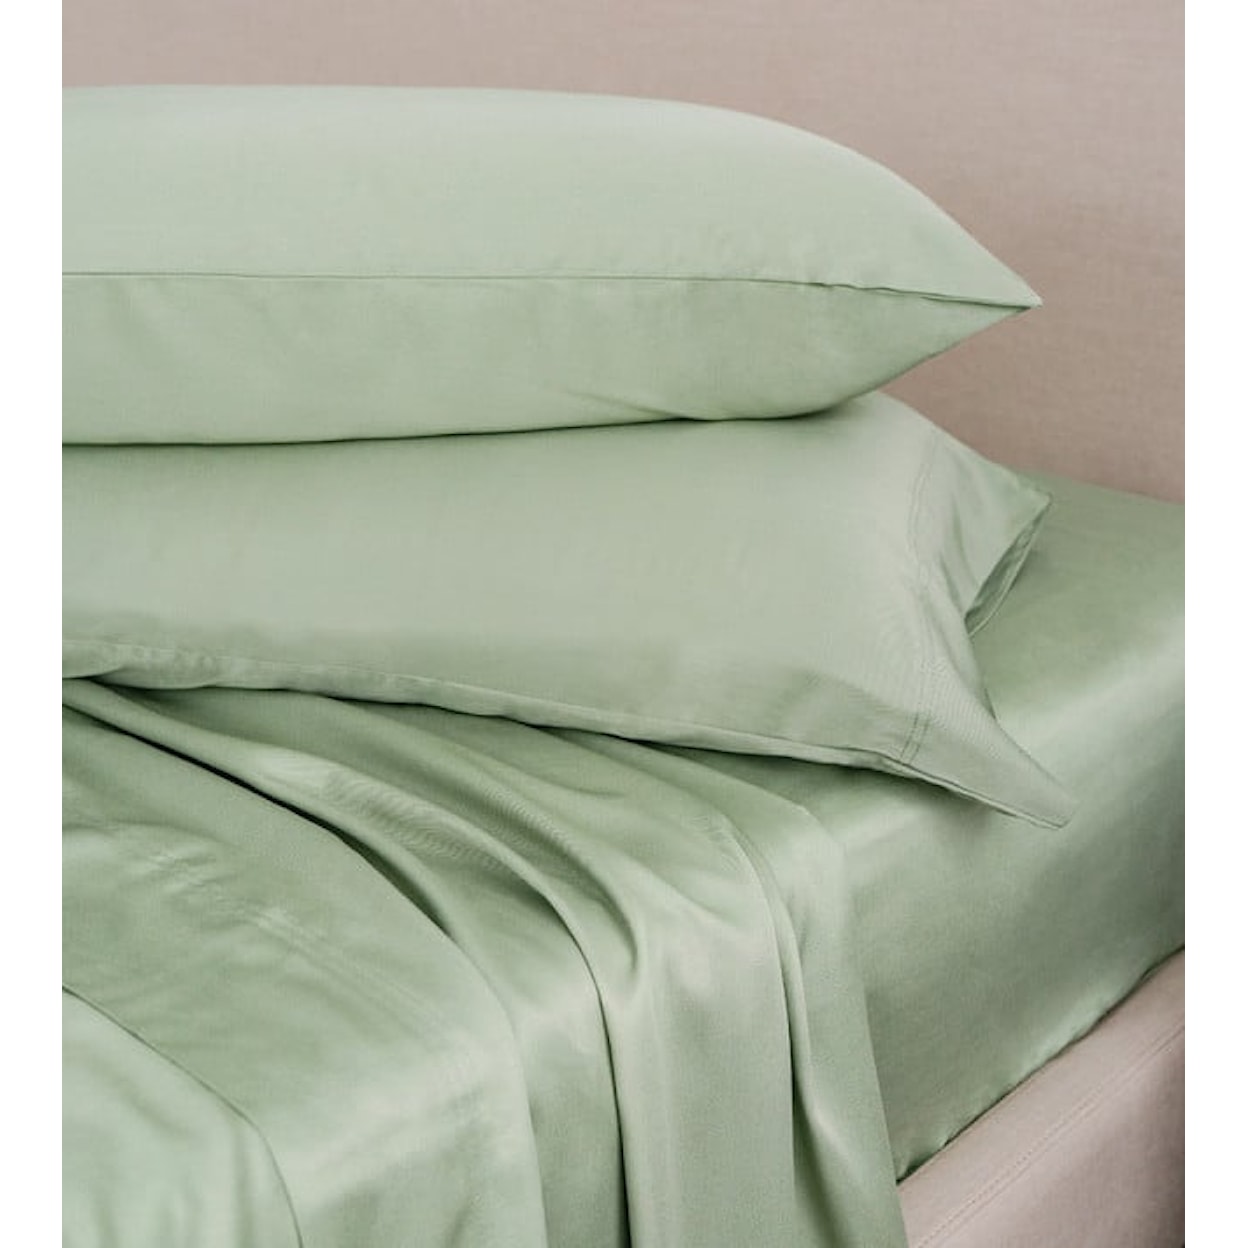 Cariloha Classic Bamboo Bed Sheet Set Queen Classic Bamboo Sheet Set in Sage